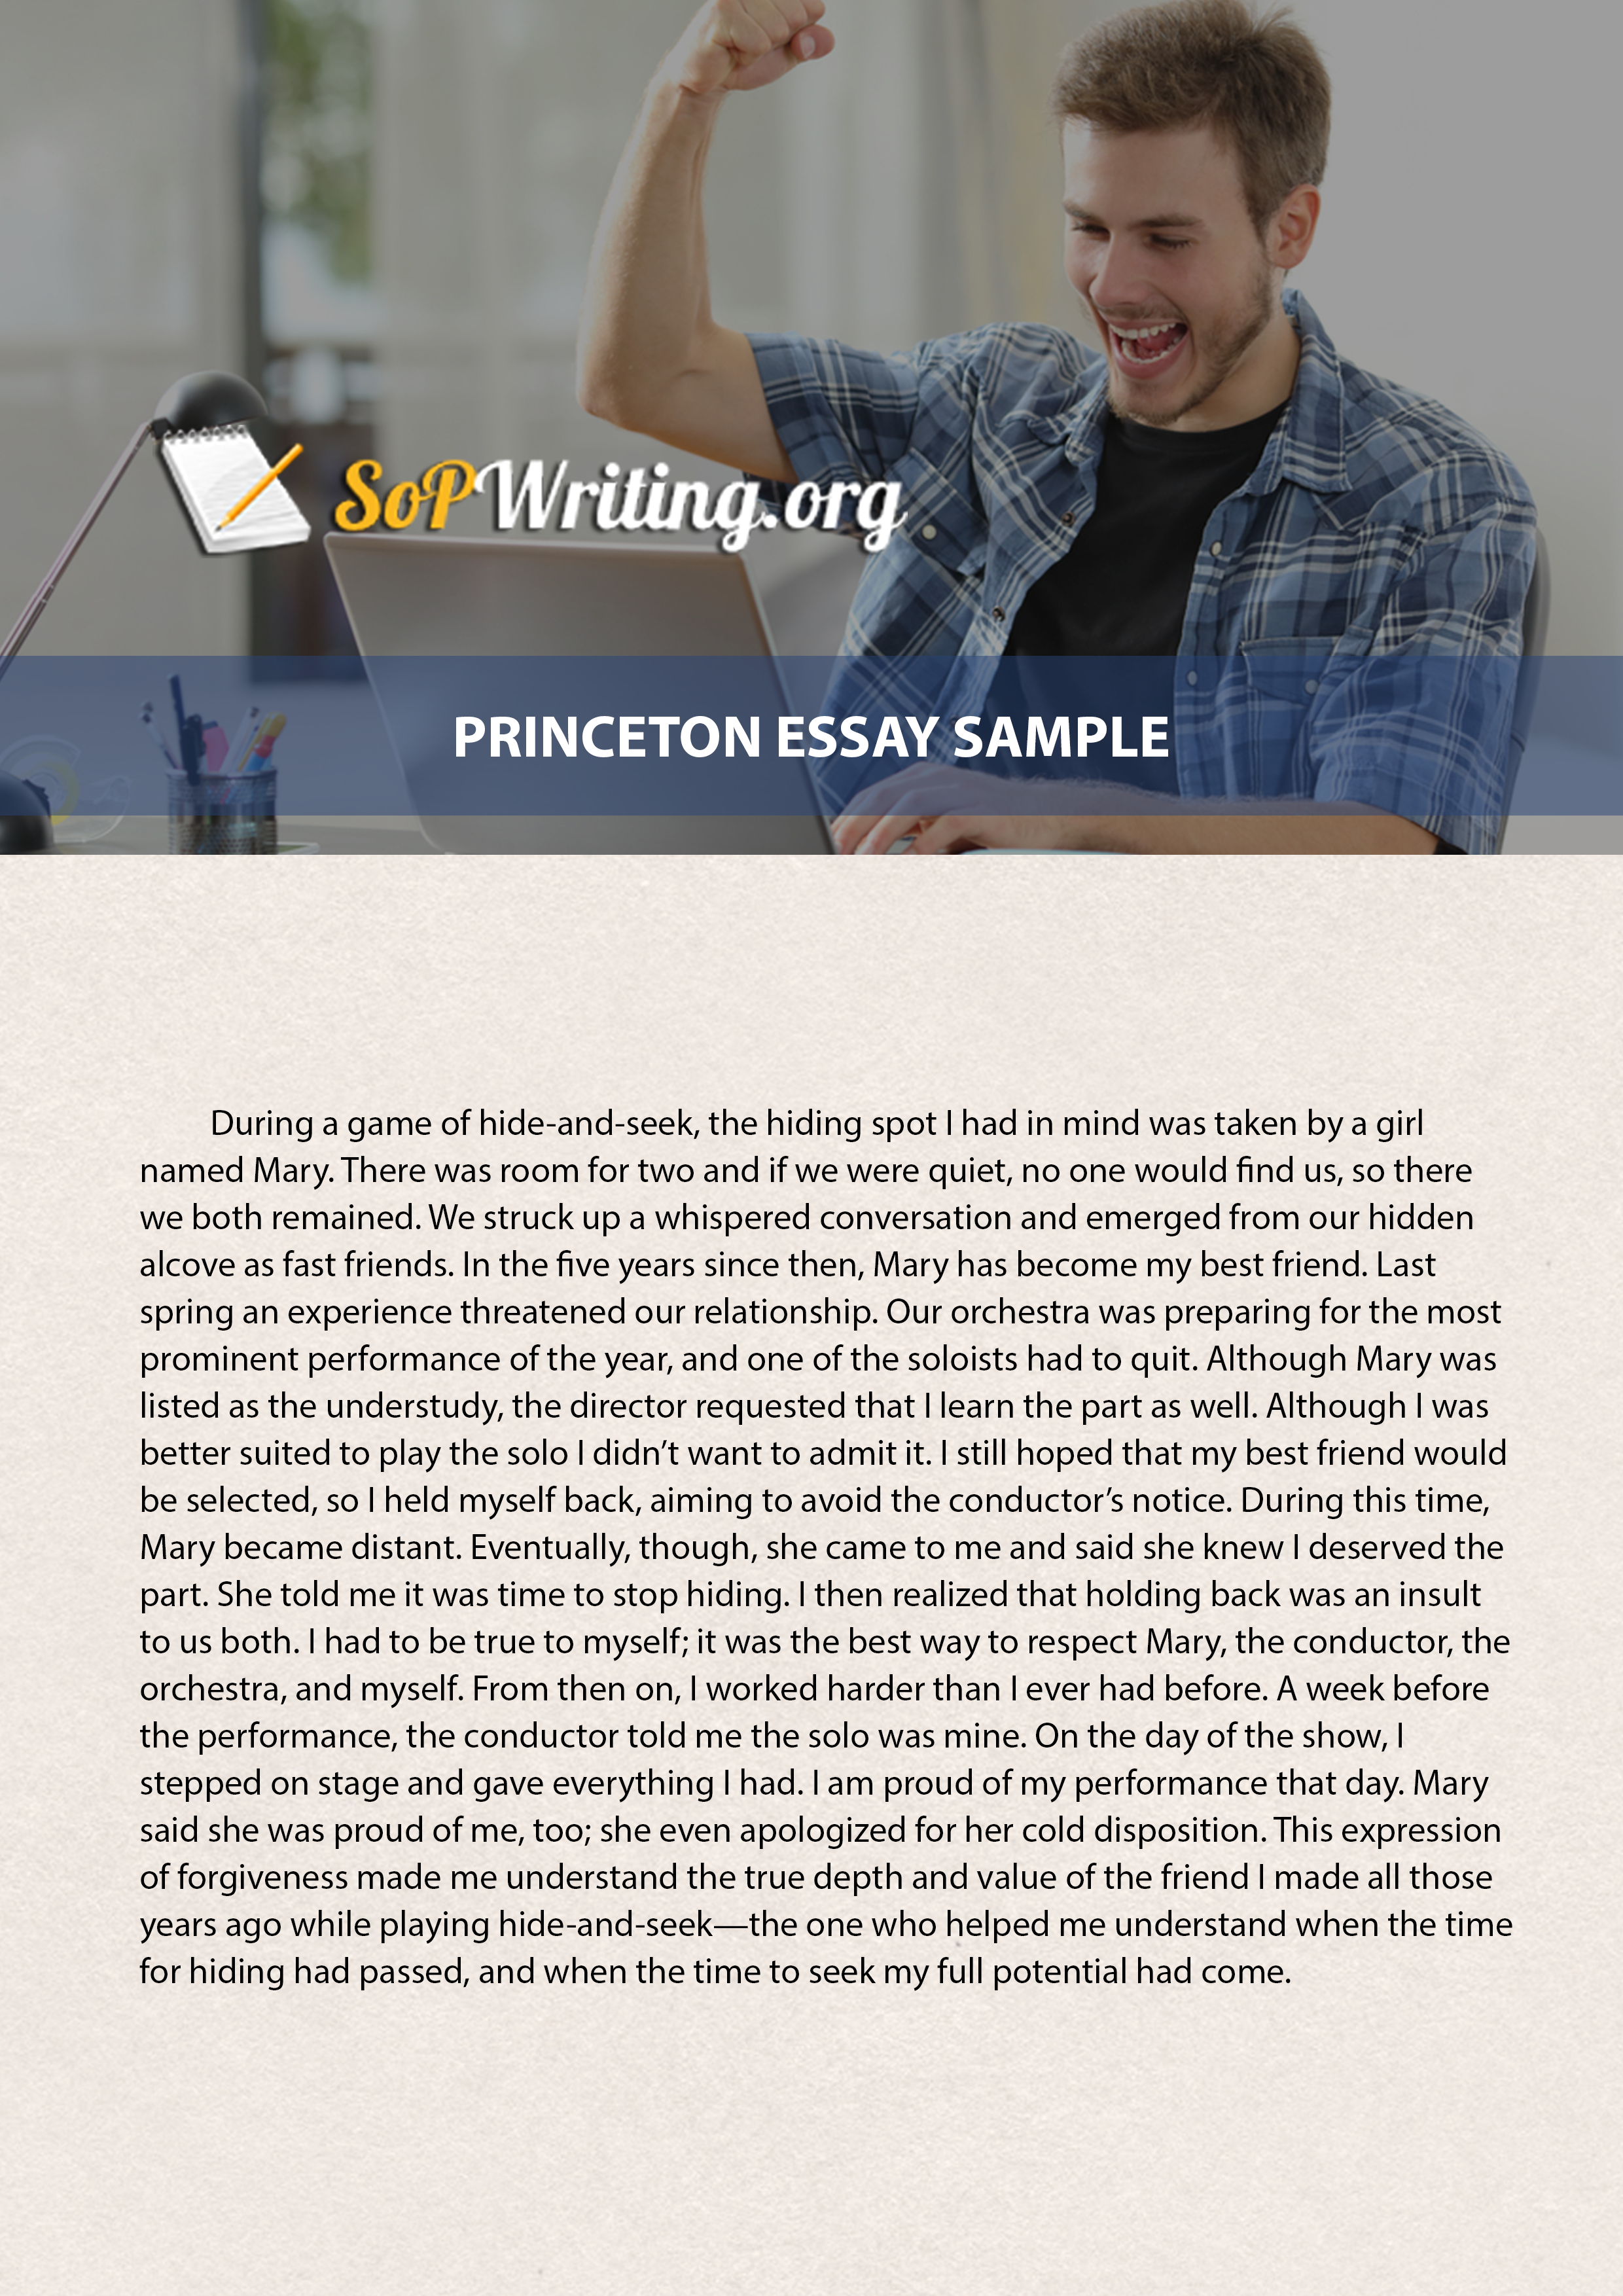 does princeton require essay